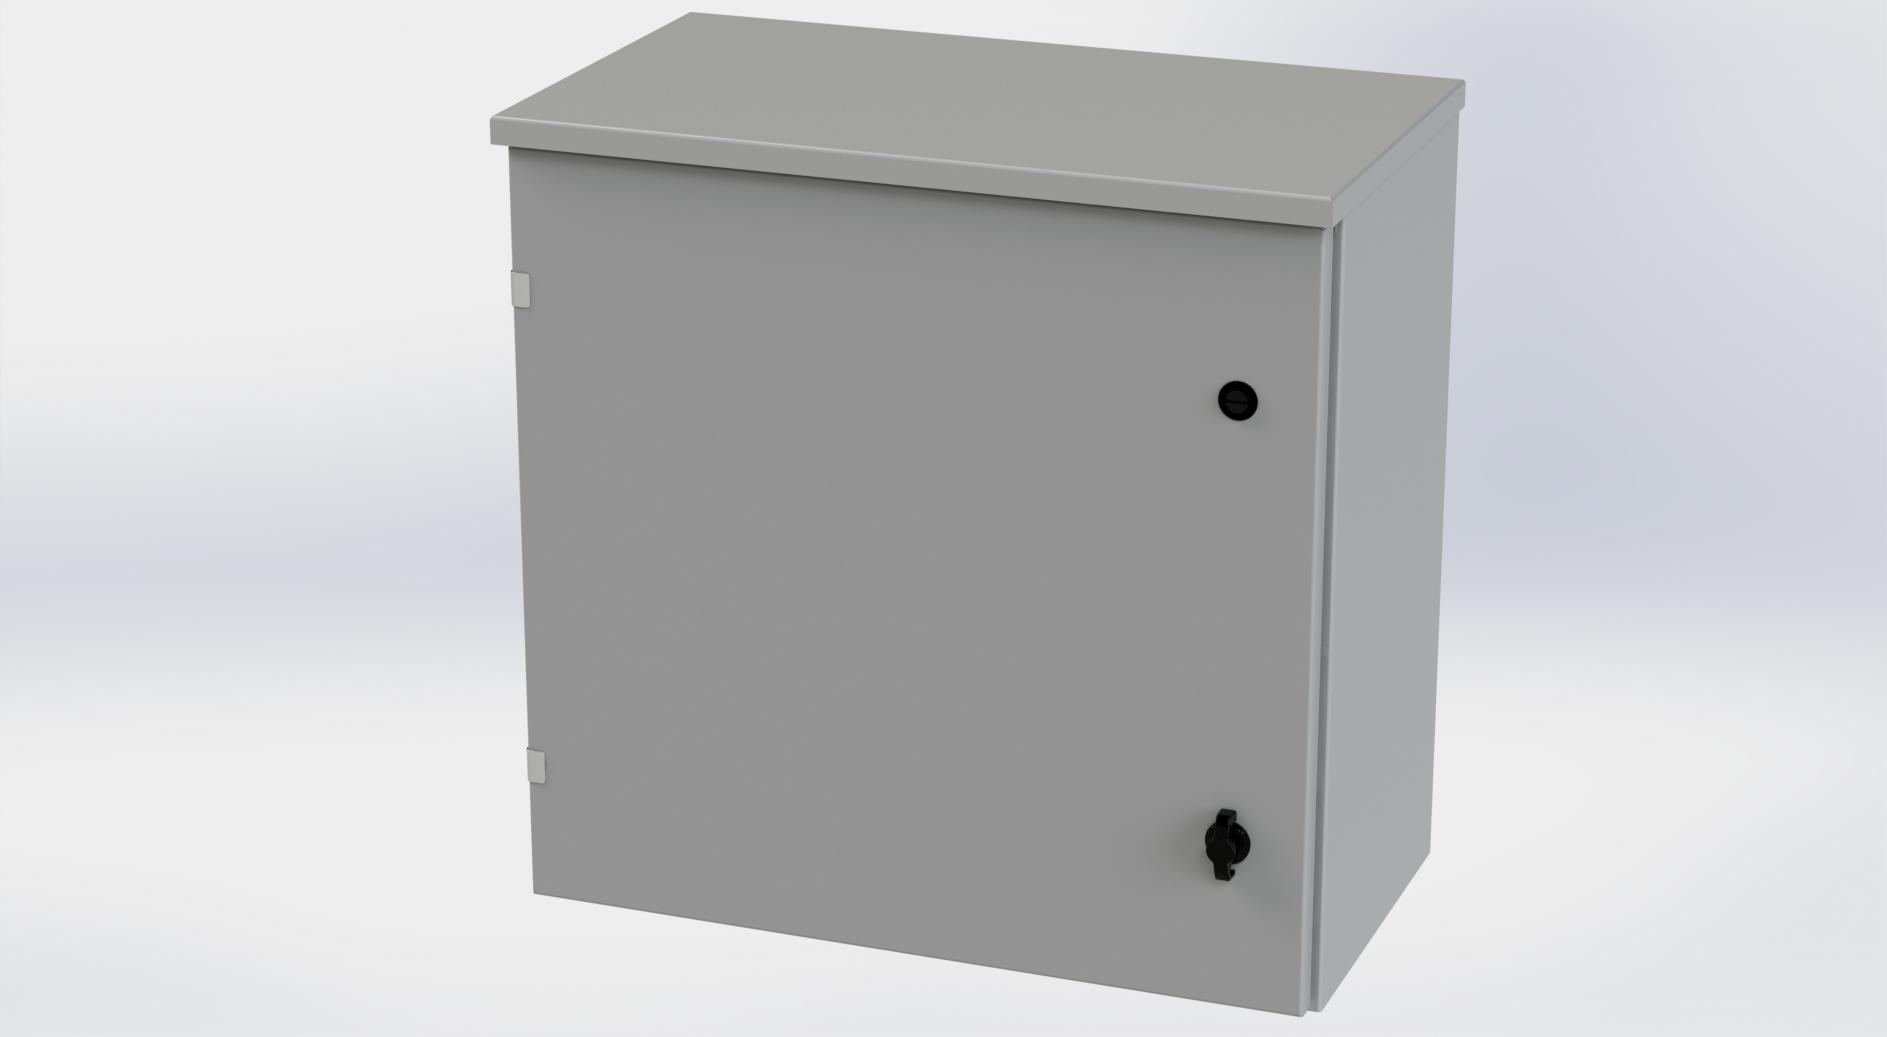 Saginaw Control SCE-24R2412LP Type-3R Hinged Cover Enclosure, Height:24.00", Width:24.00", Depth:12.00", ANSI-61 gray powder coating inside and out. Optional sub-panels are powder coated white.